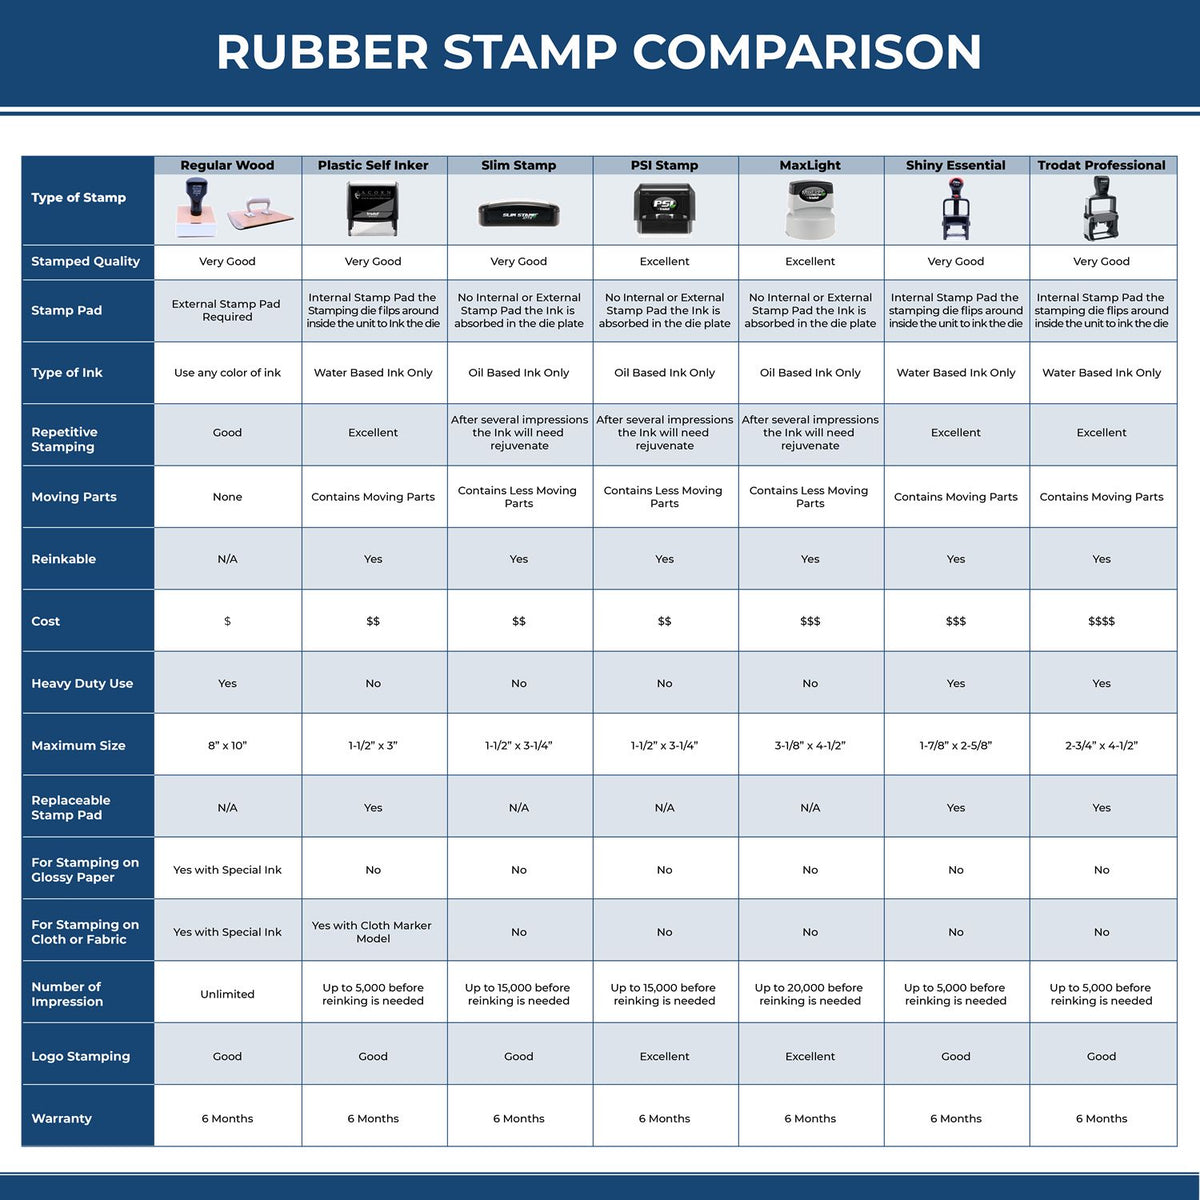 Large Self Inking Void Stamp 4158S Rubber Stamp Comparison